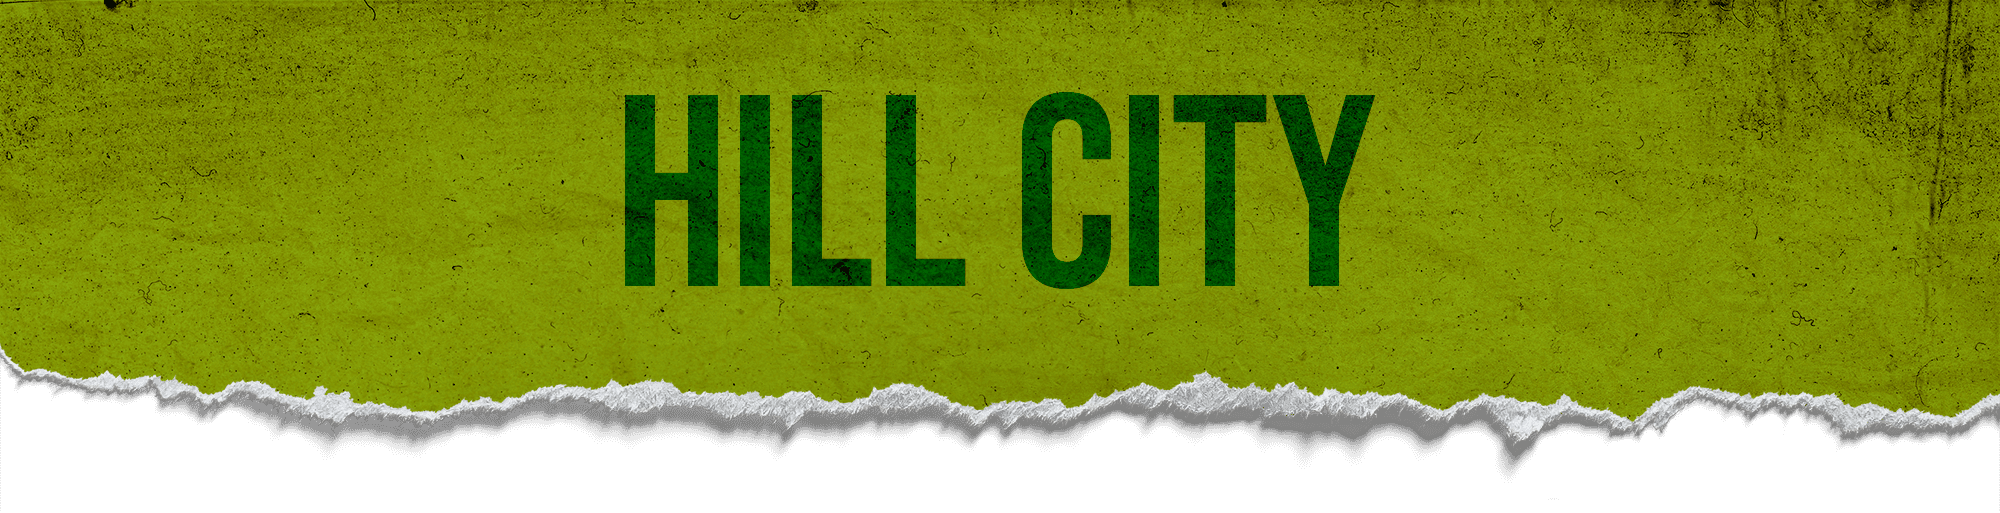 Hill City Page Header